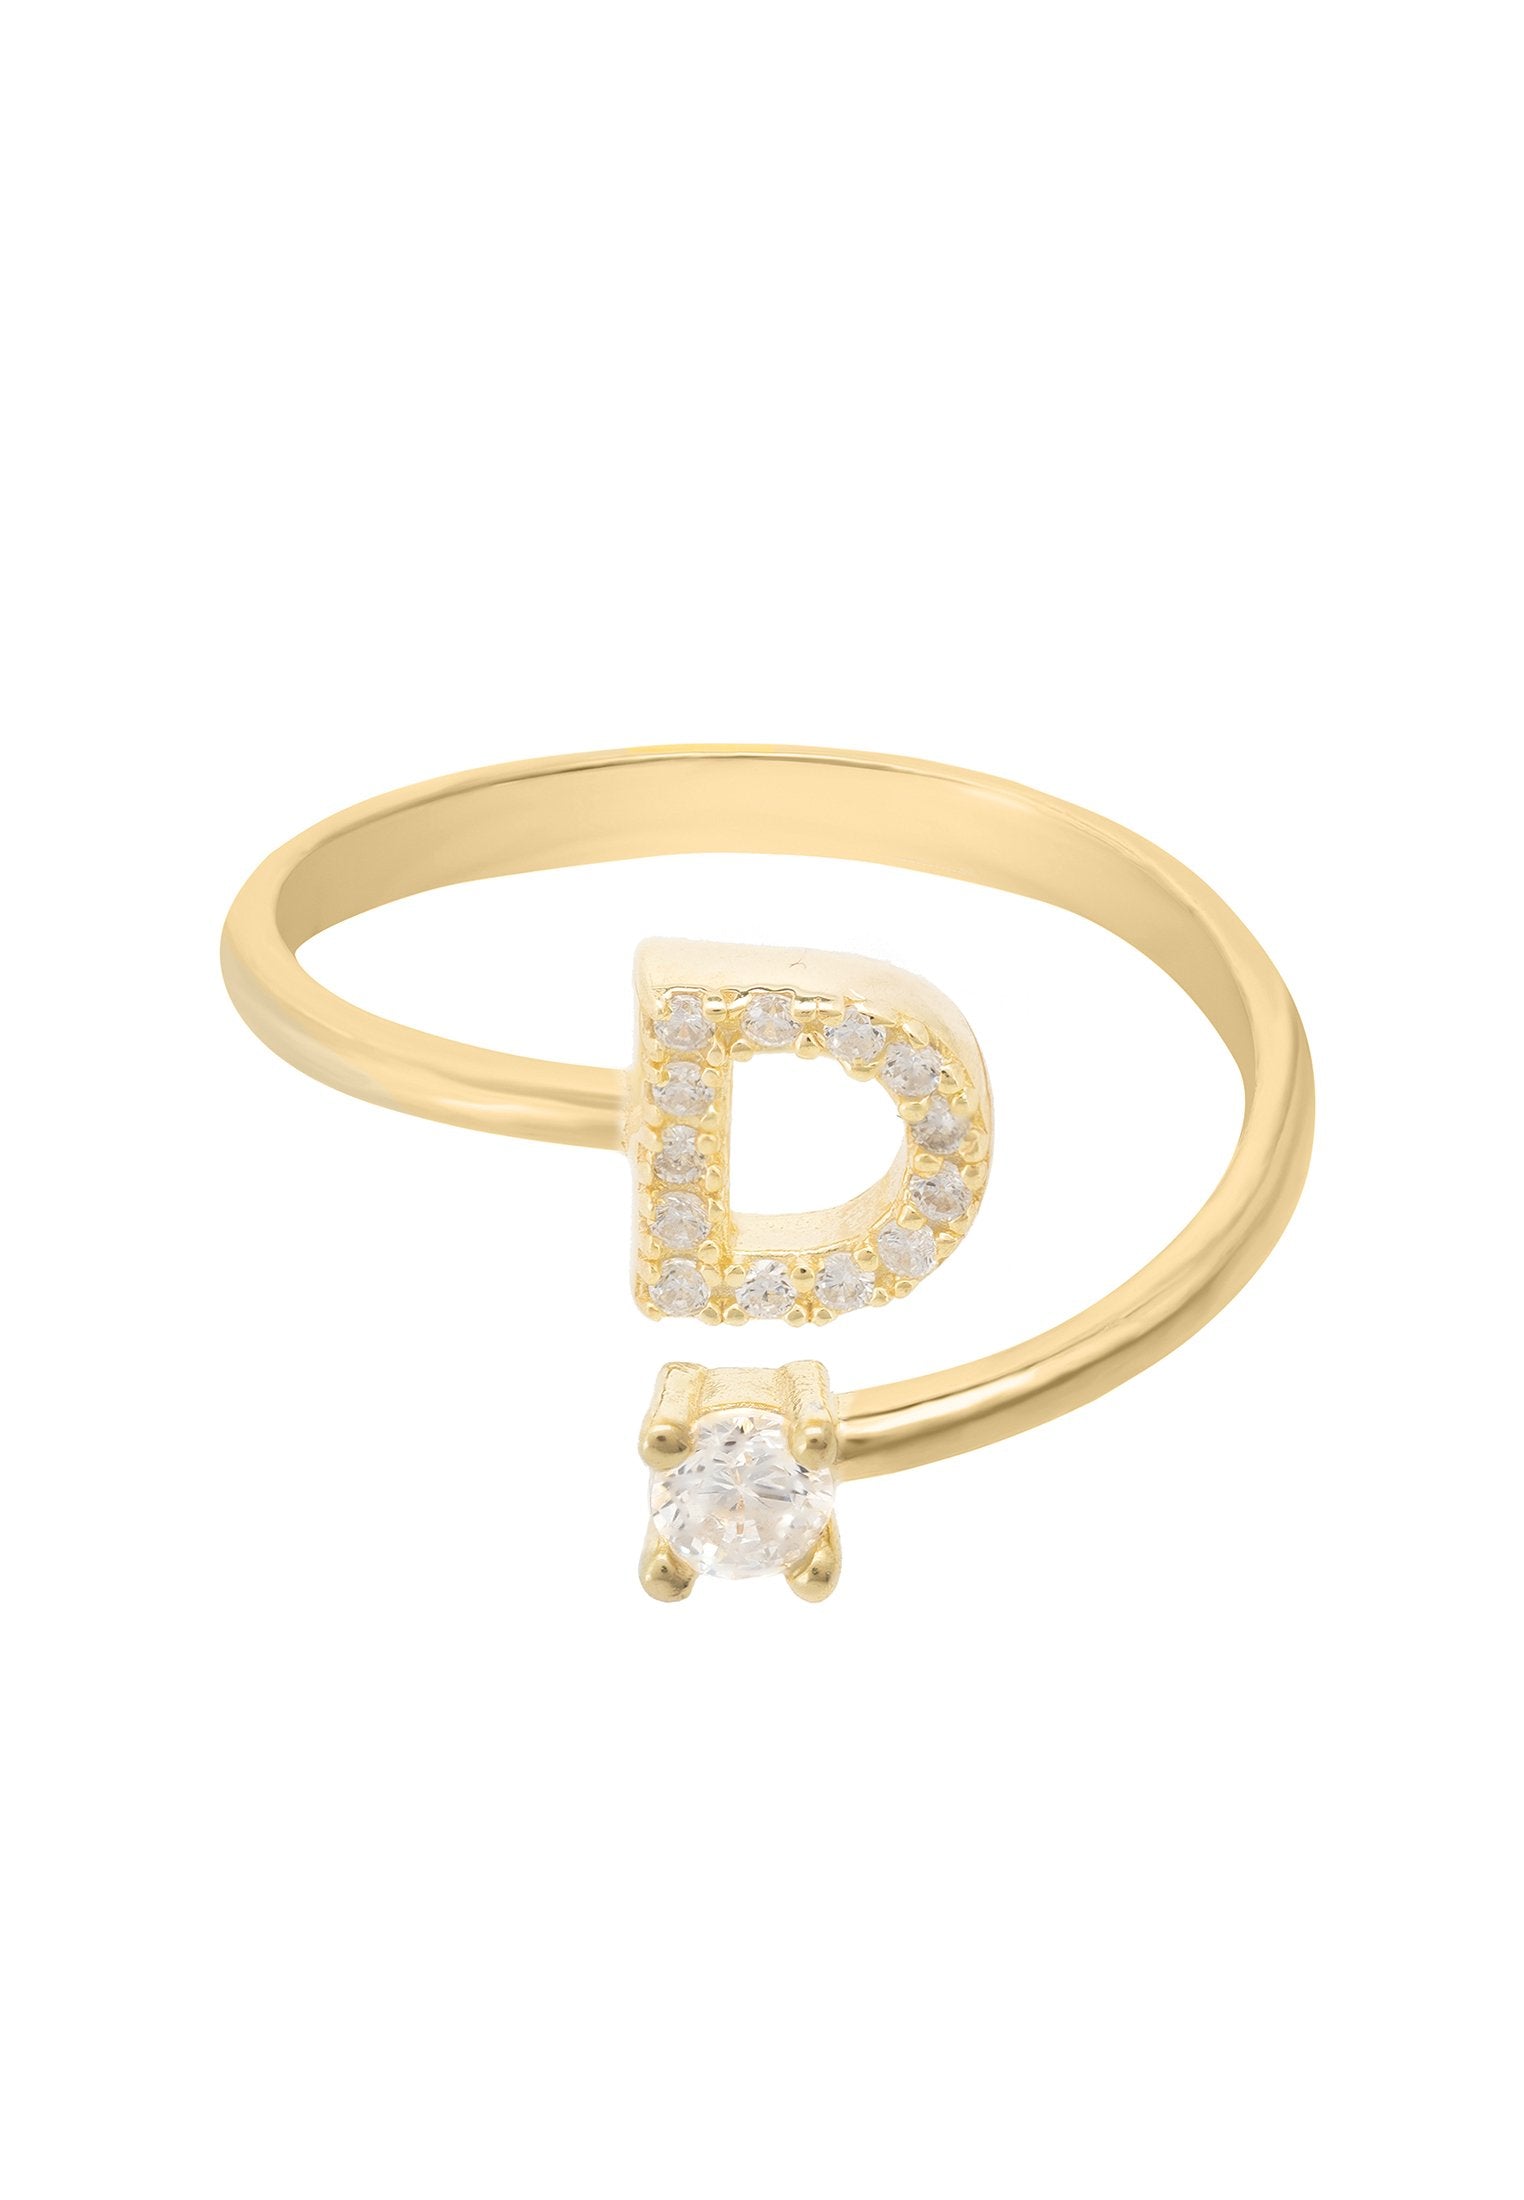 Gold Initial Letter Ring with Zircon and Cubic Zirconia Stones - Personalized Birthday Gift Idea Bijou Her